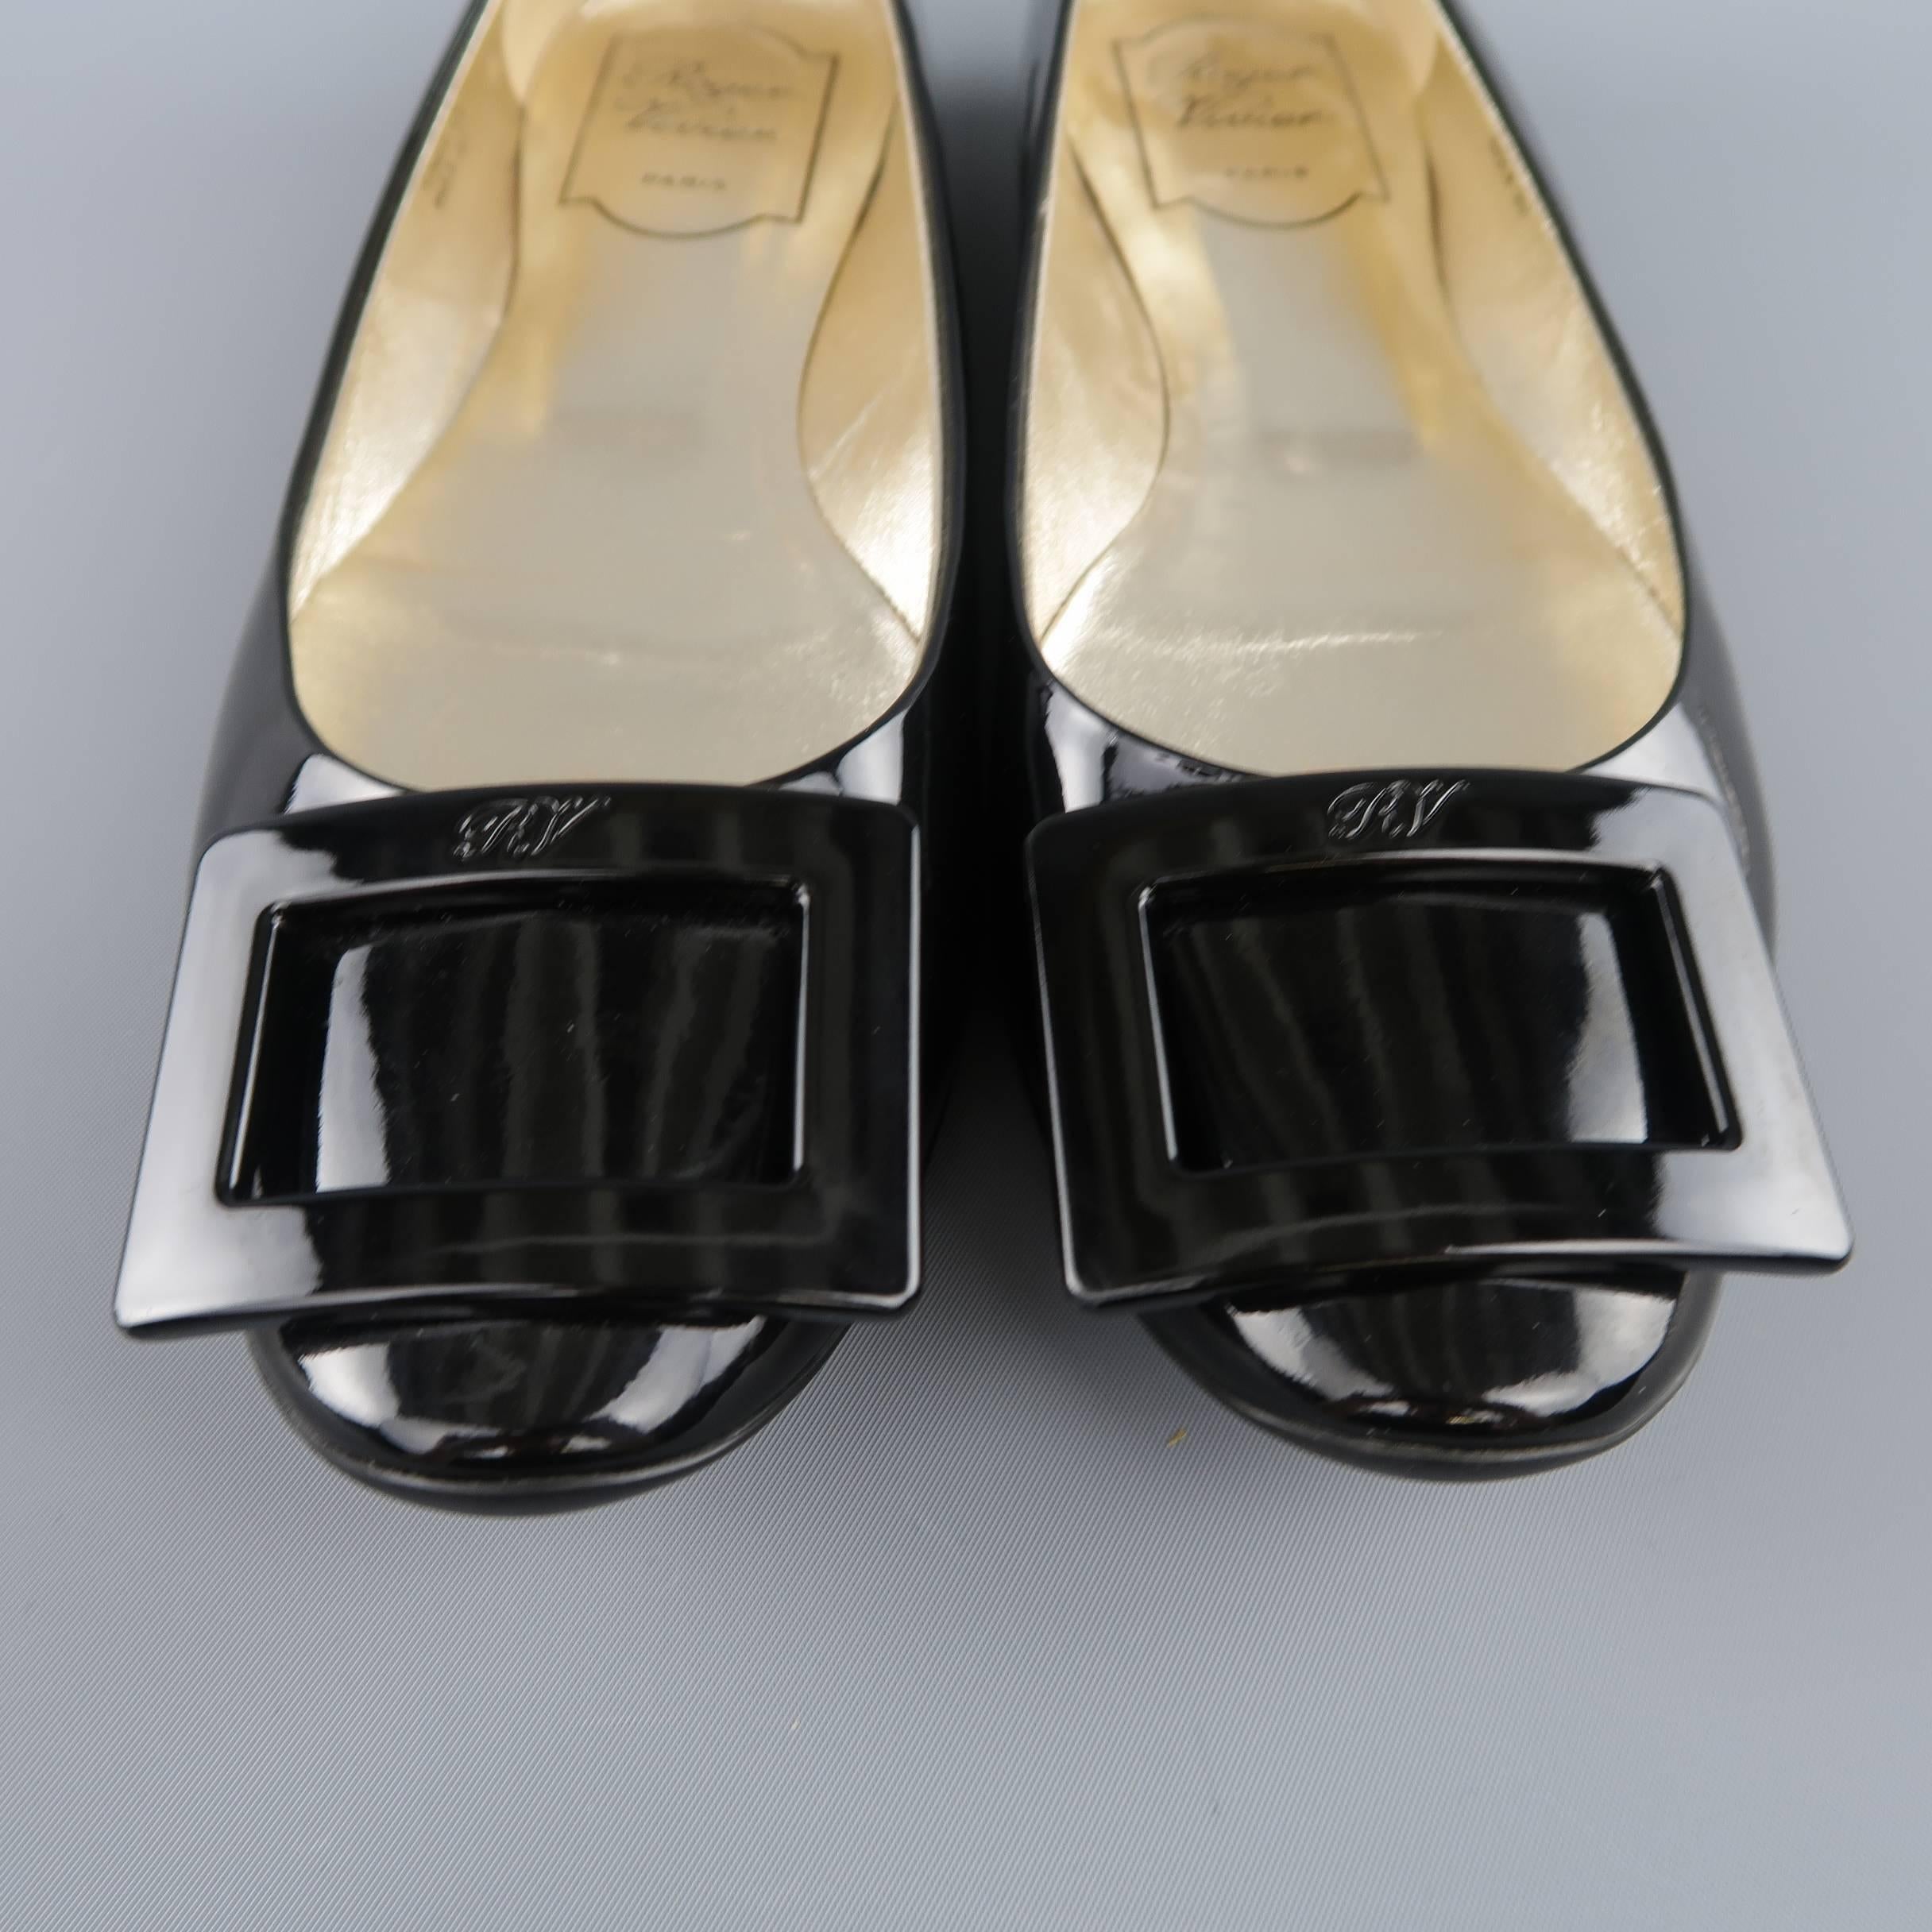 ROGER VIVIER Gommette ballet flats come in glossy patent leather and feature metallic gold leather lining, rubber sole, and oversized engraved buckle. Made in Italy.
 
Excellent Pre-Owned Condition.
Marked: IT 37.5
 
Outsole: 10 x 3 in.


SKU: 83389